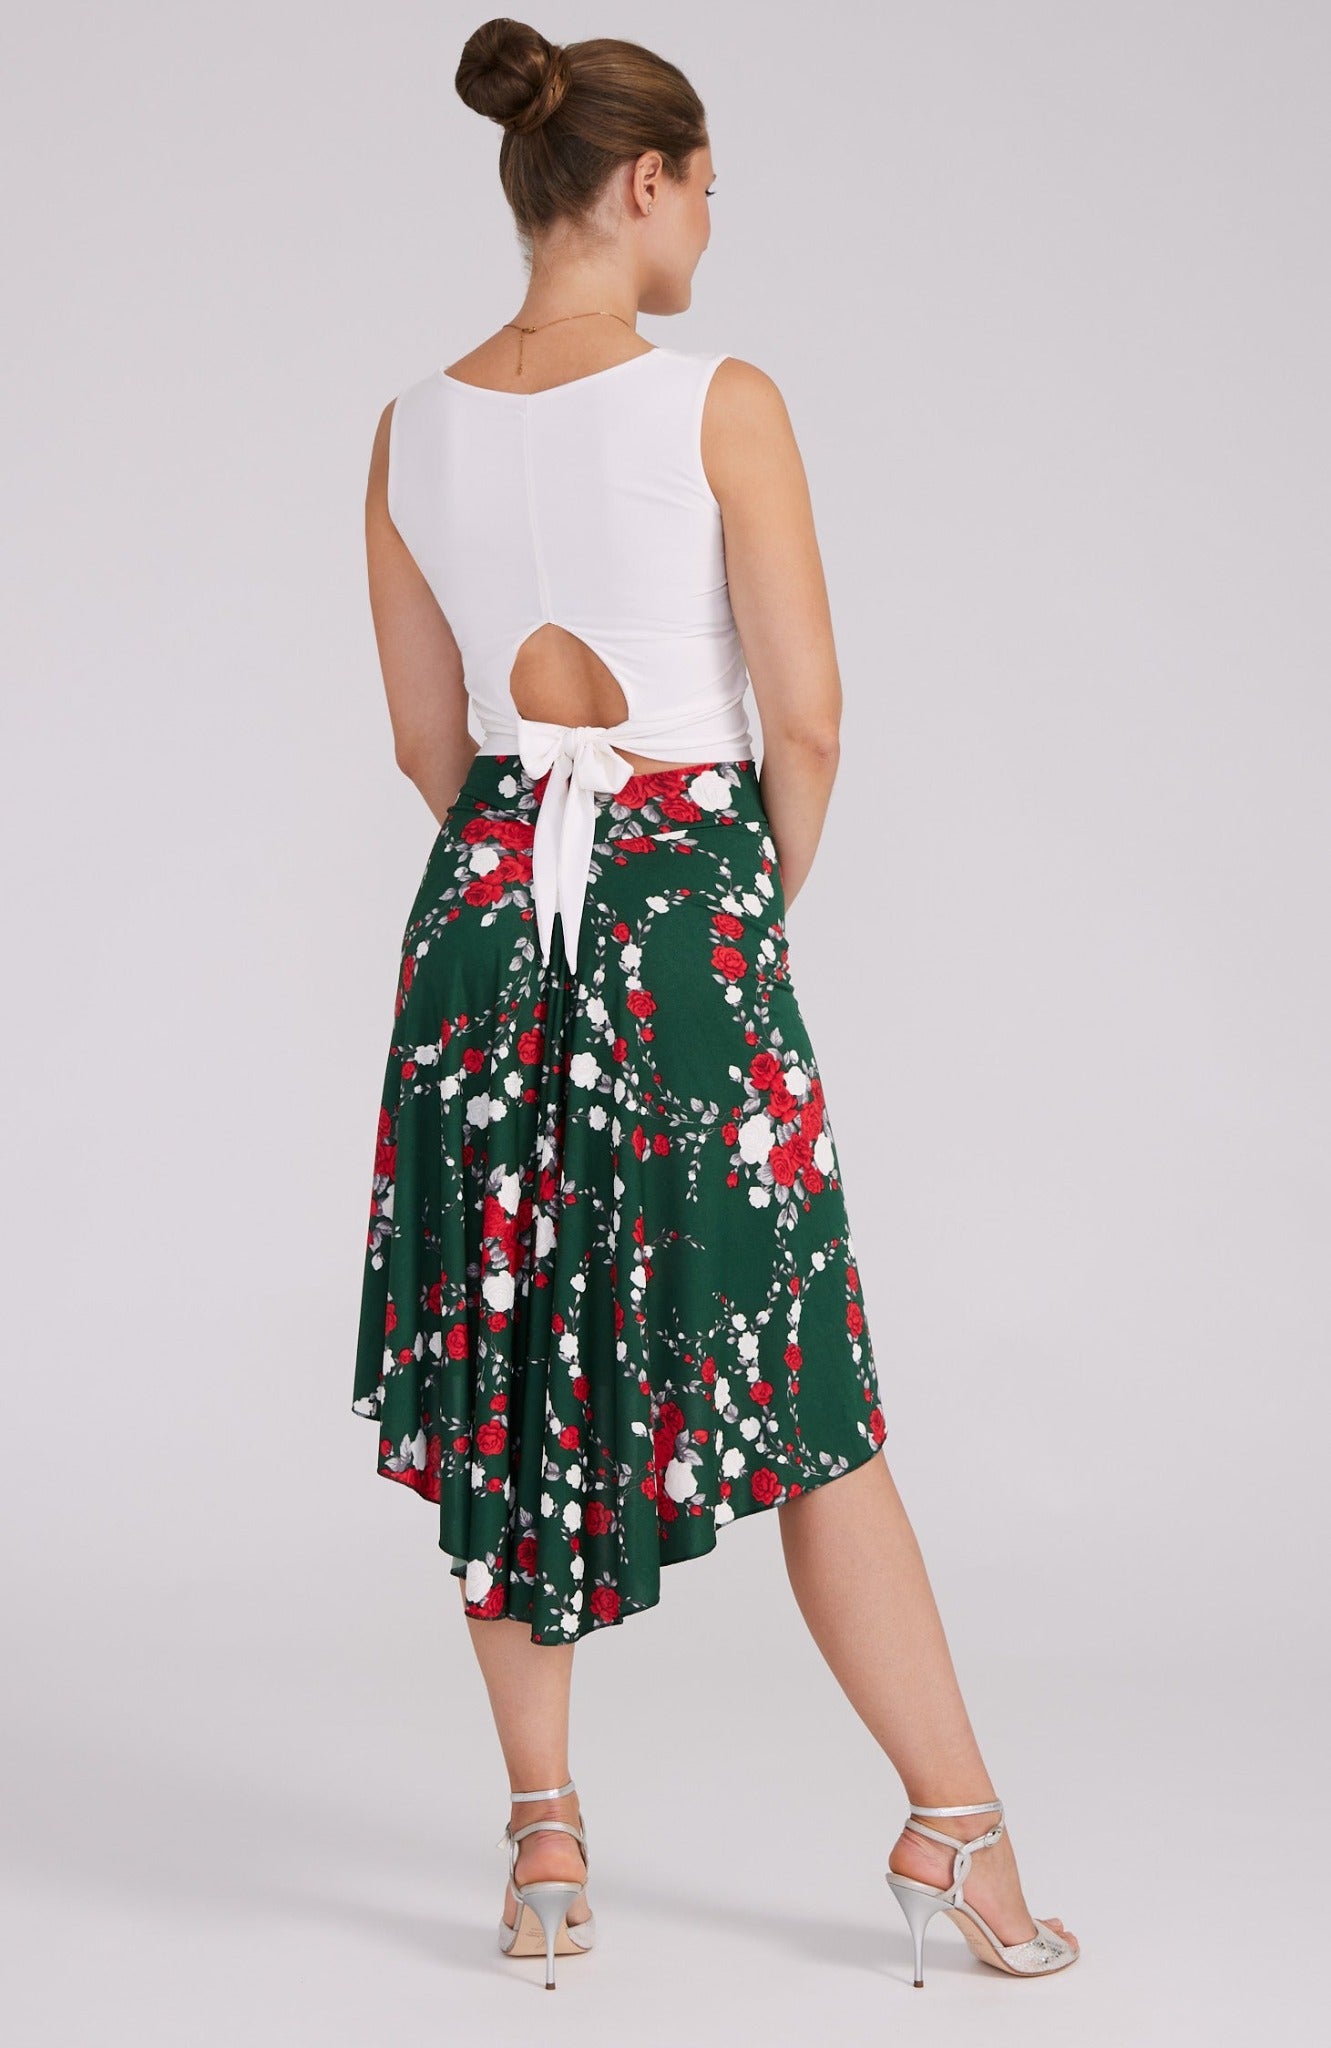 argentine tango skirt in red roses